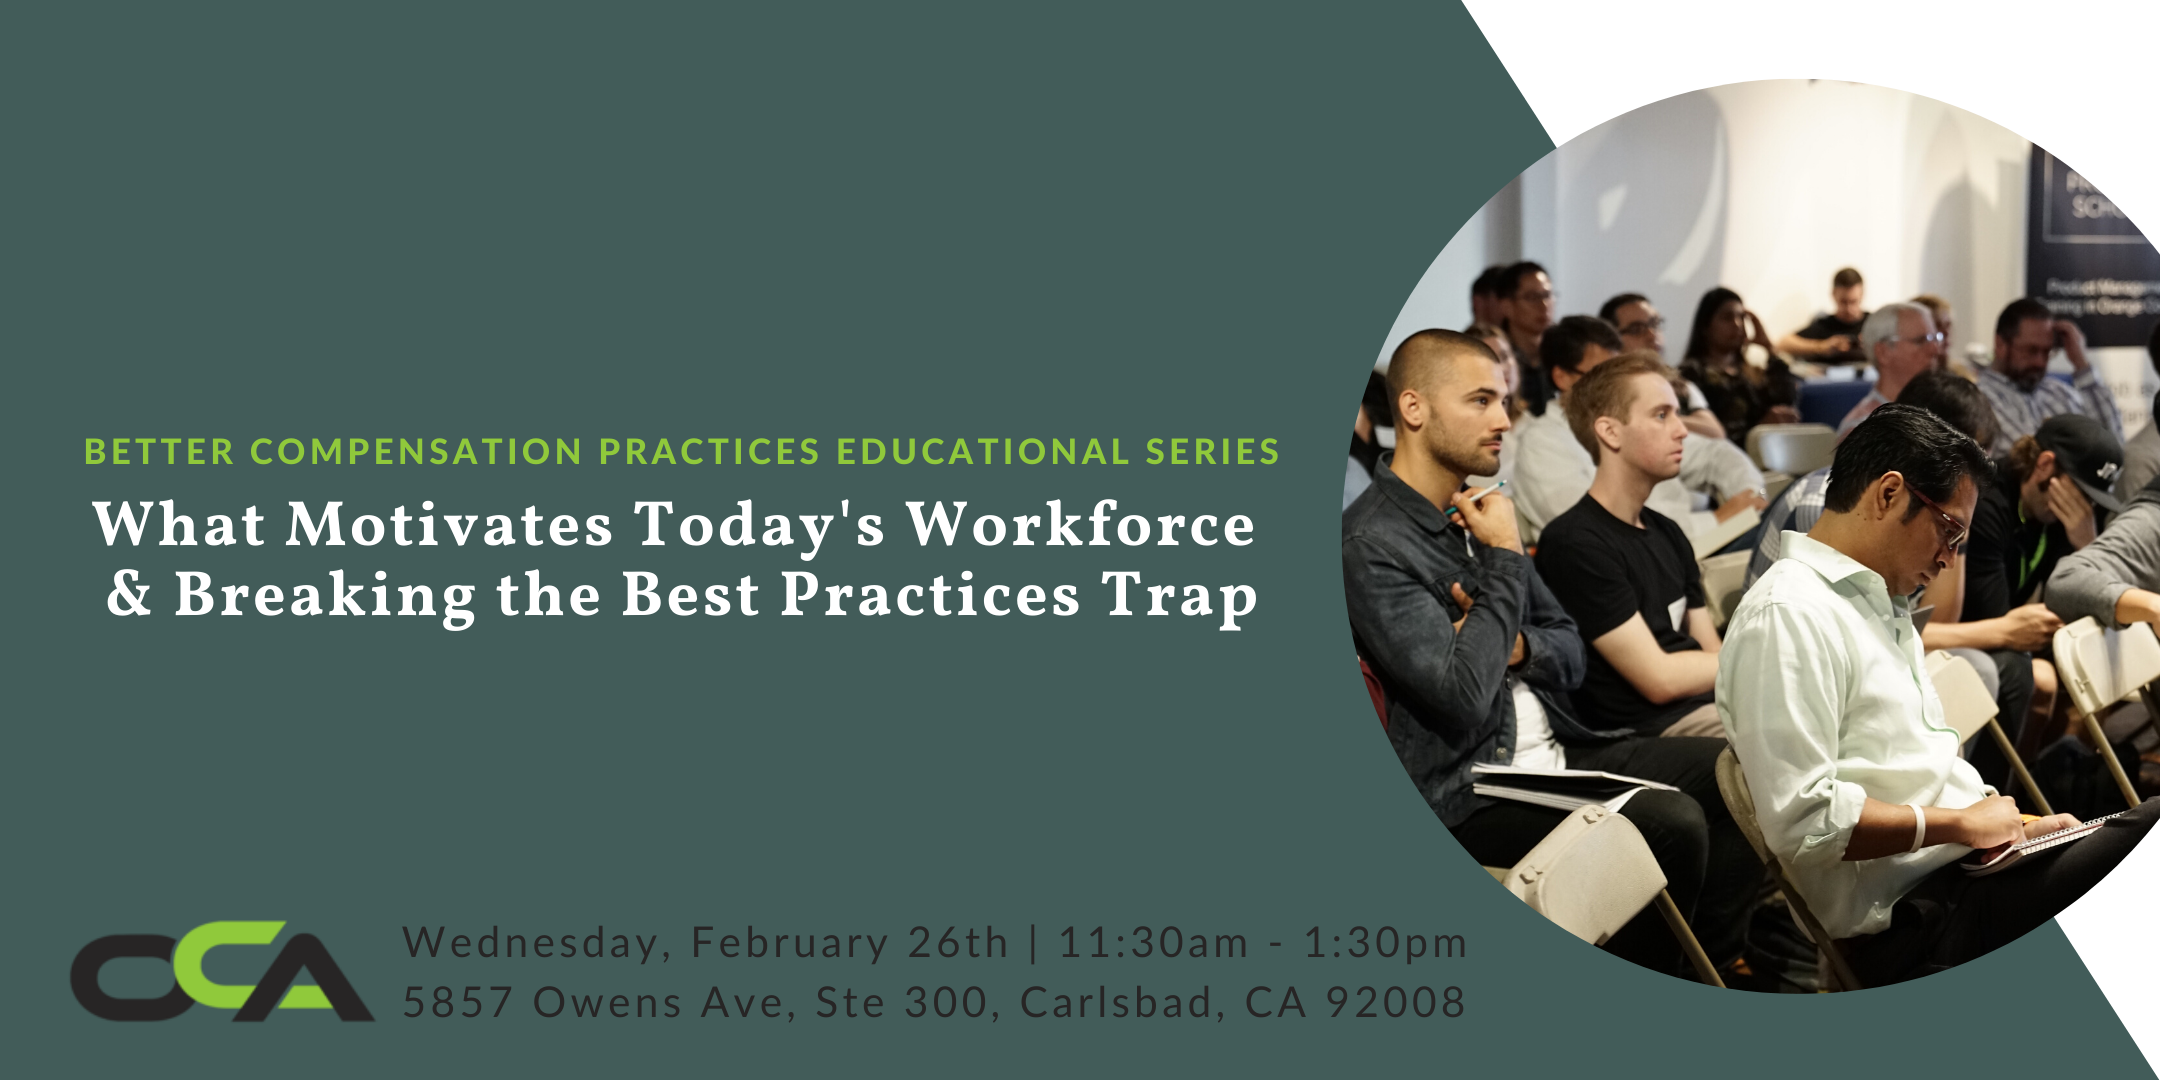 What Motivates Today’s Workforce & Breaking the Best Practices Trap | Carlsbad